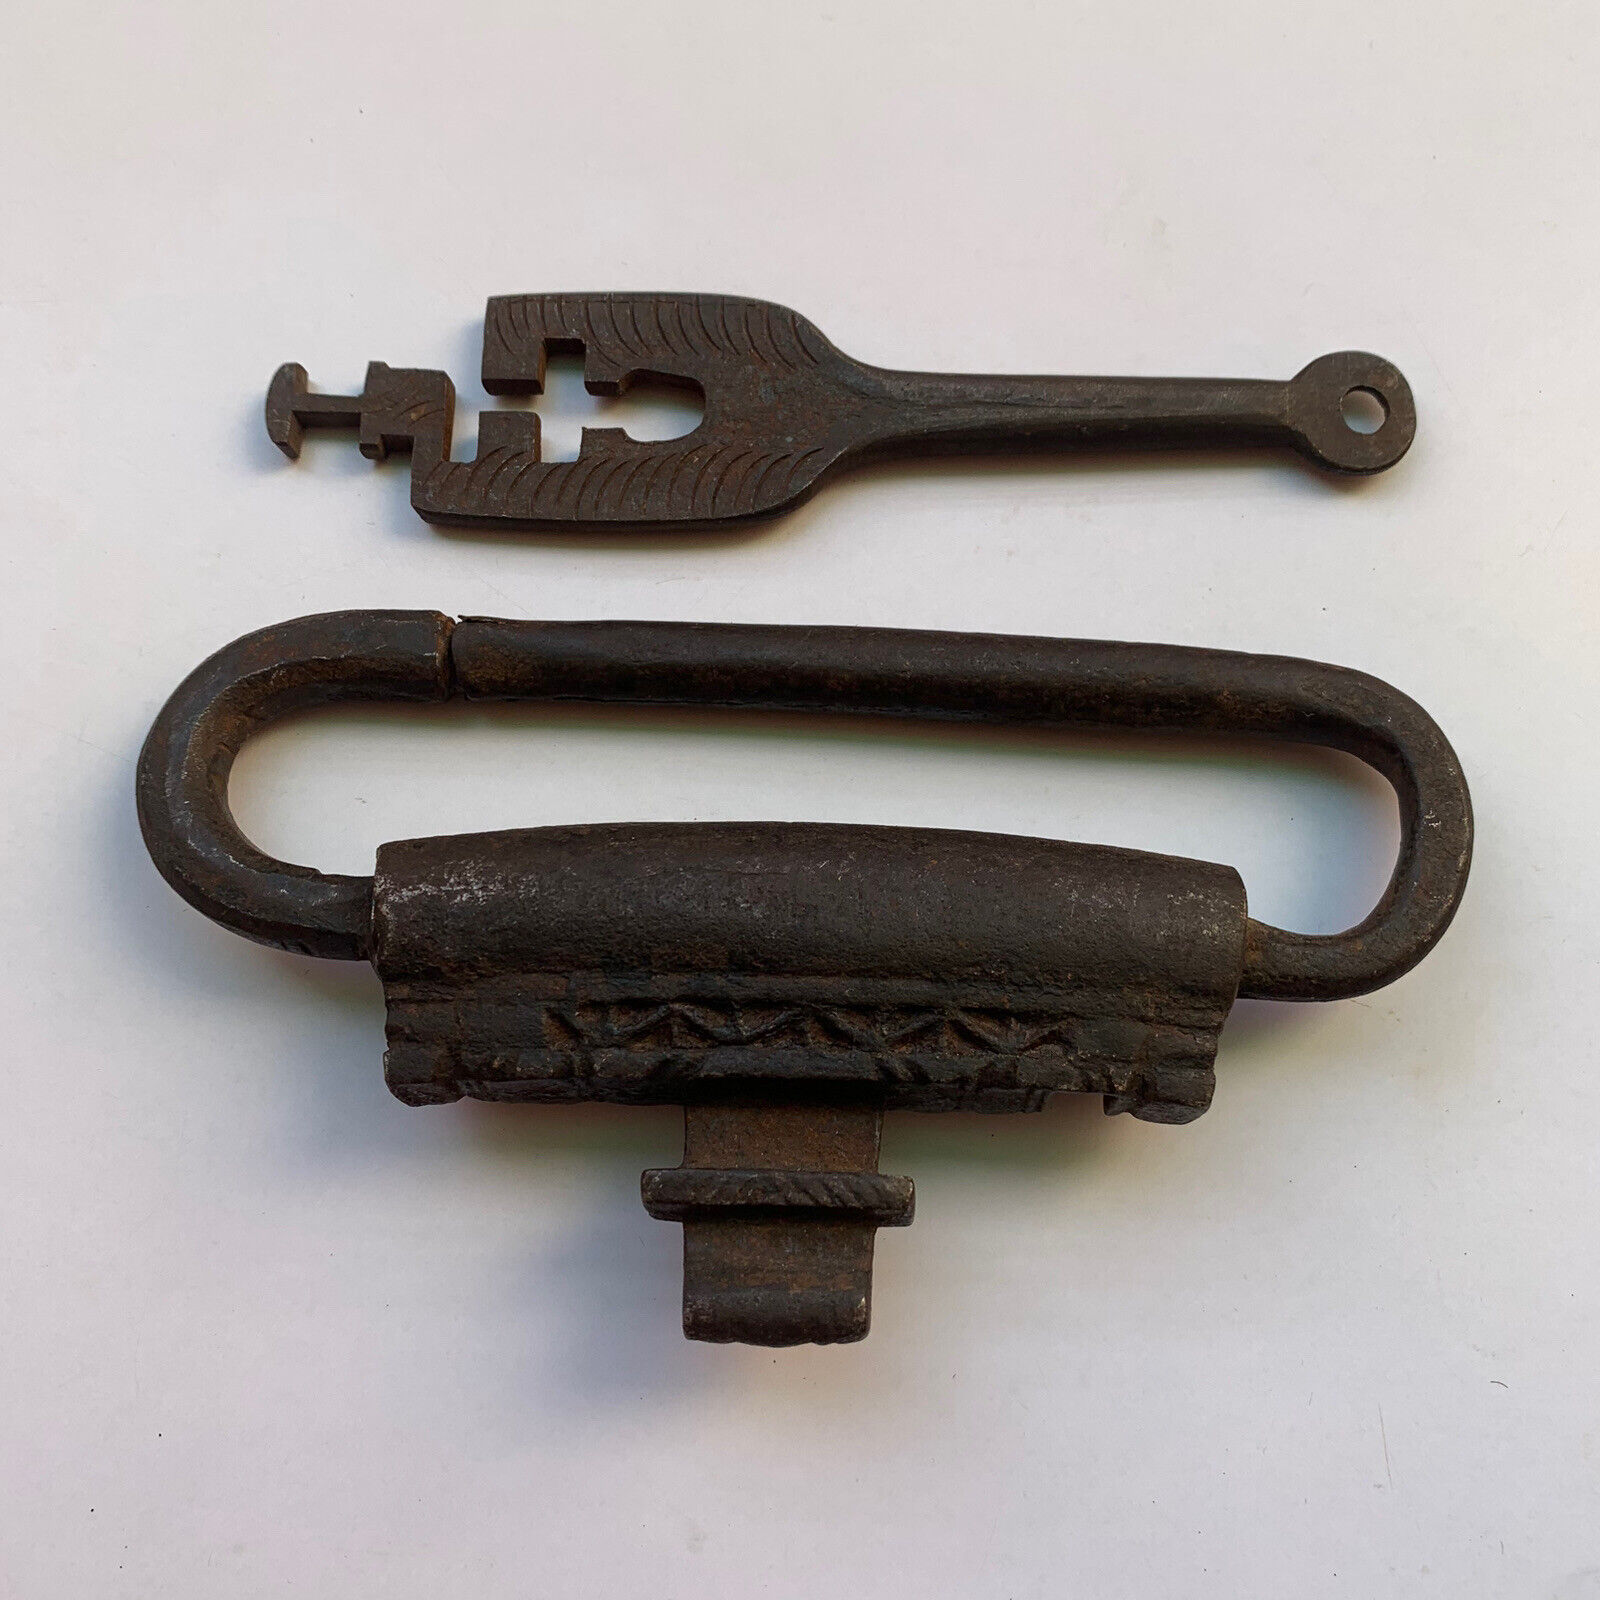 1850's Iron padlock or lock key TRICK or PUZZLE BARBED SPRING Old or antique.